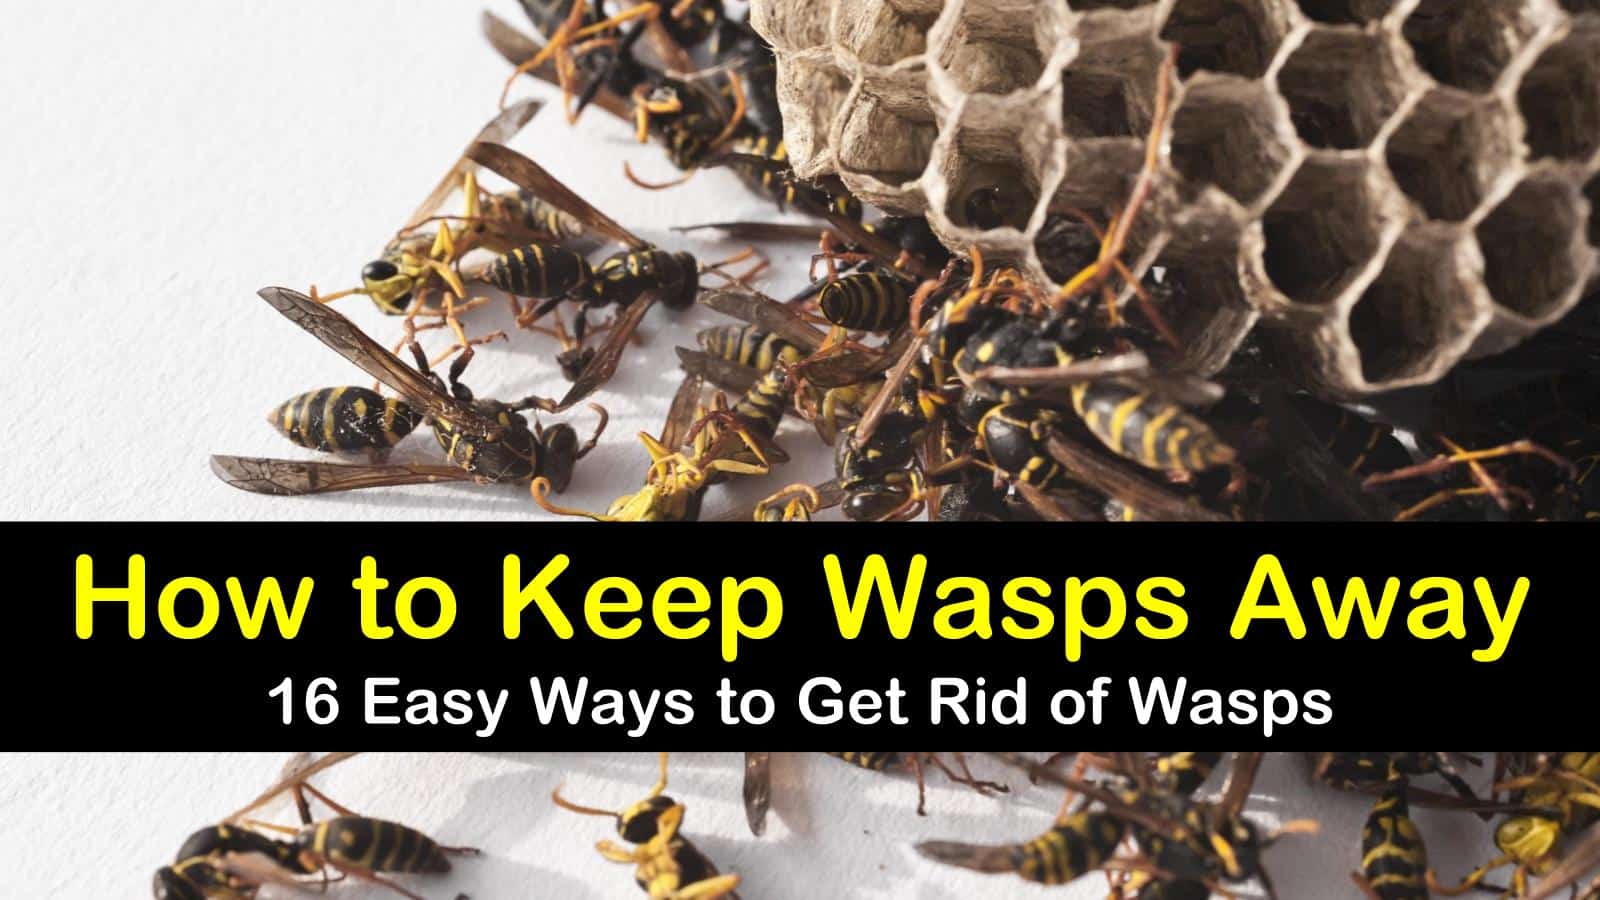 How to Keep Wasps Away